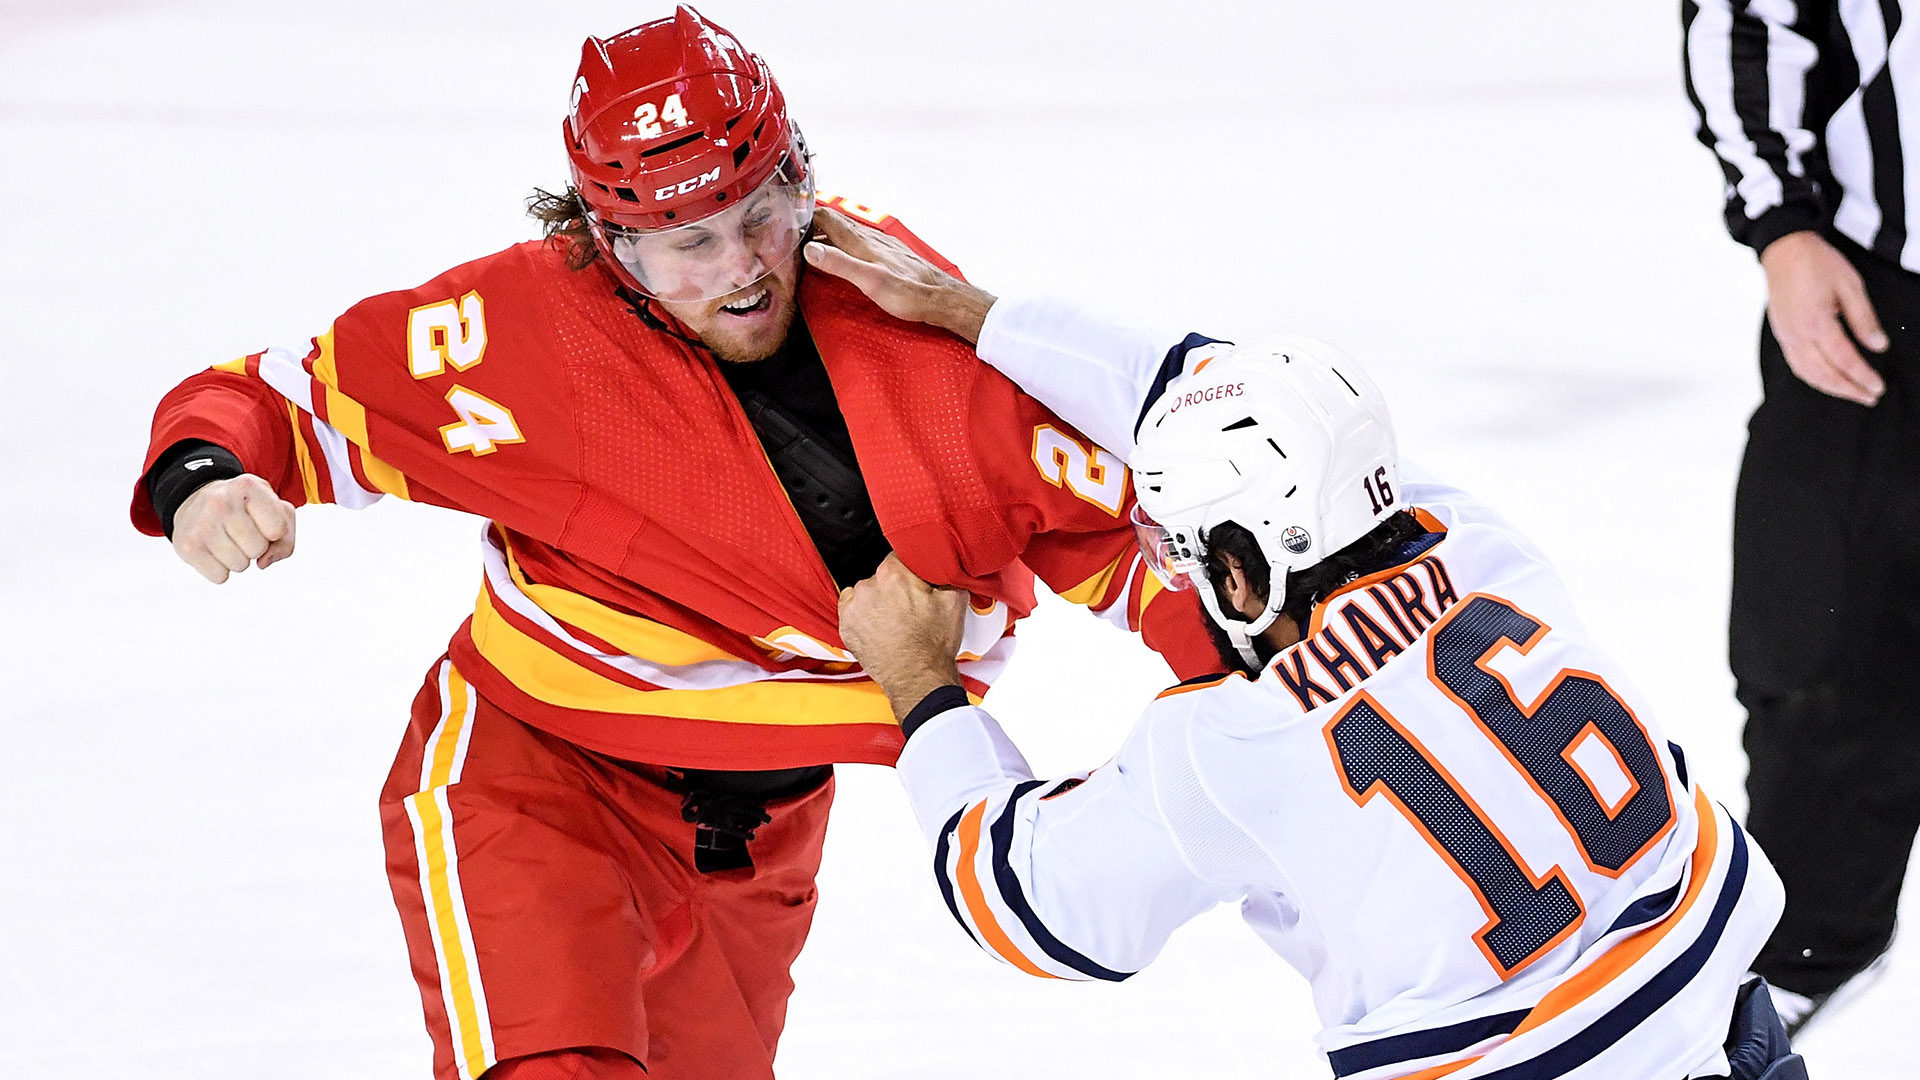 Khaira of Flames’ Ritchie KO ‘Oilers’ after headshot in Kylington